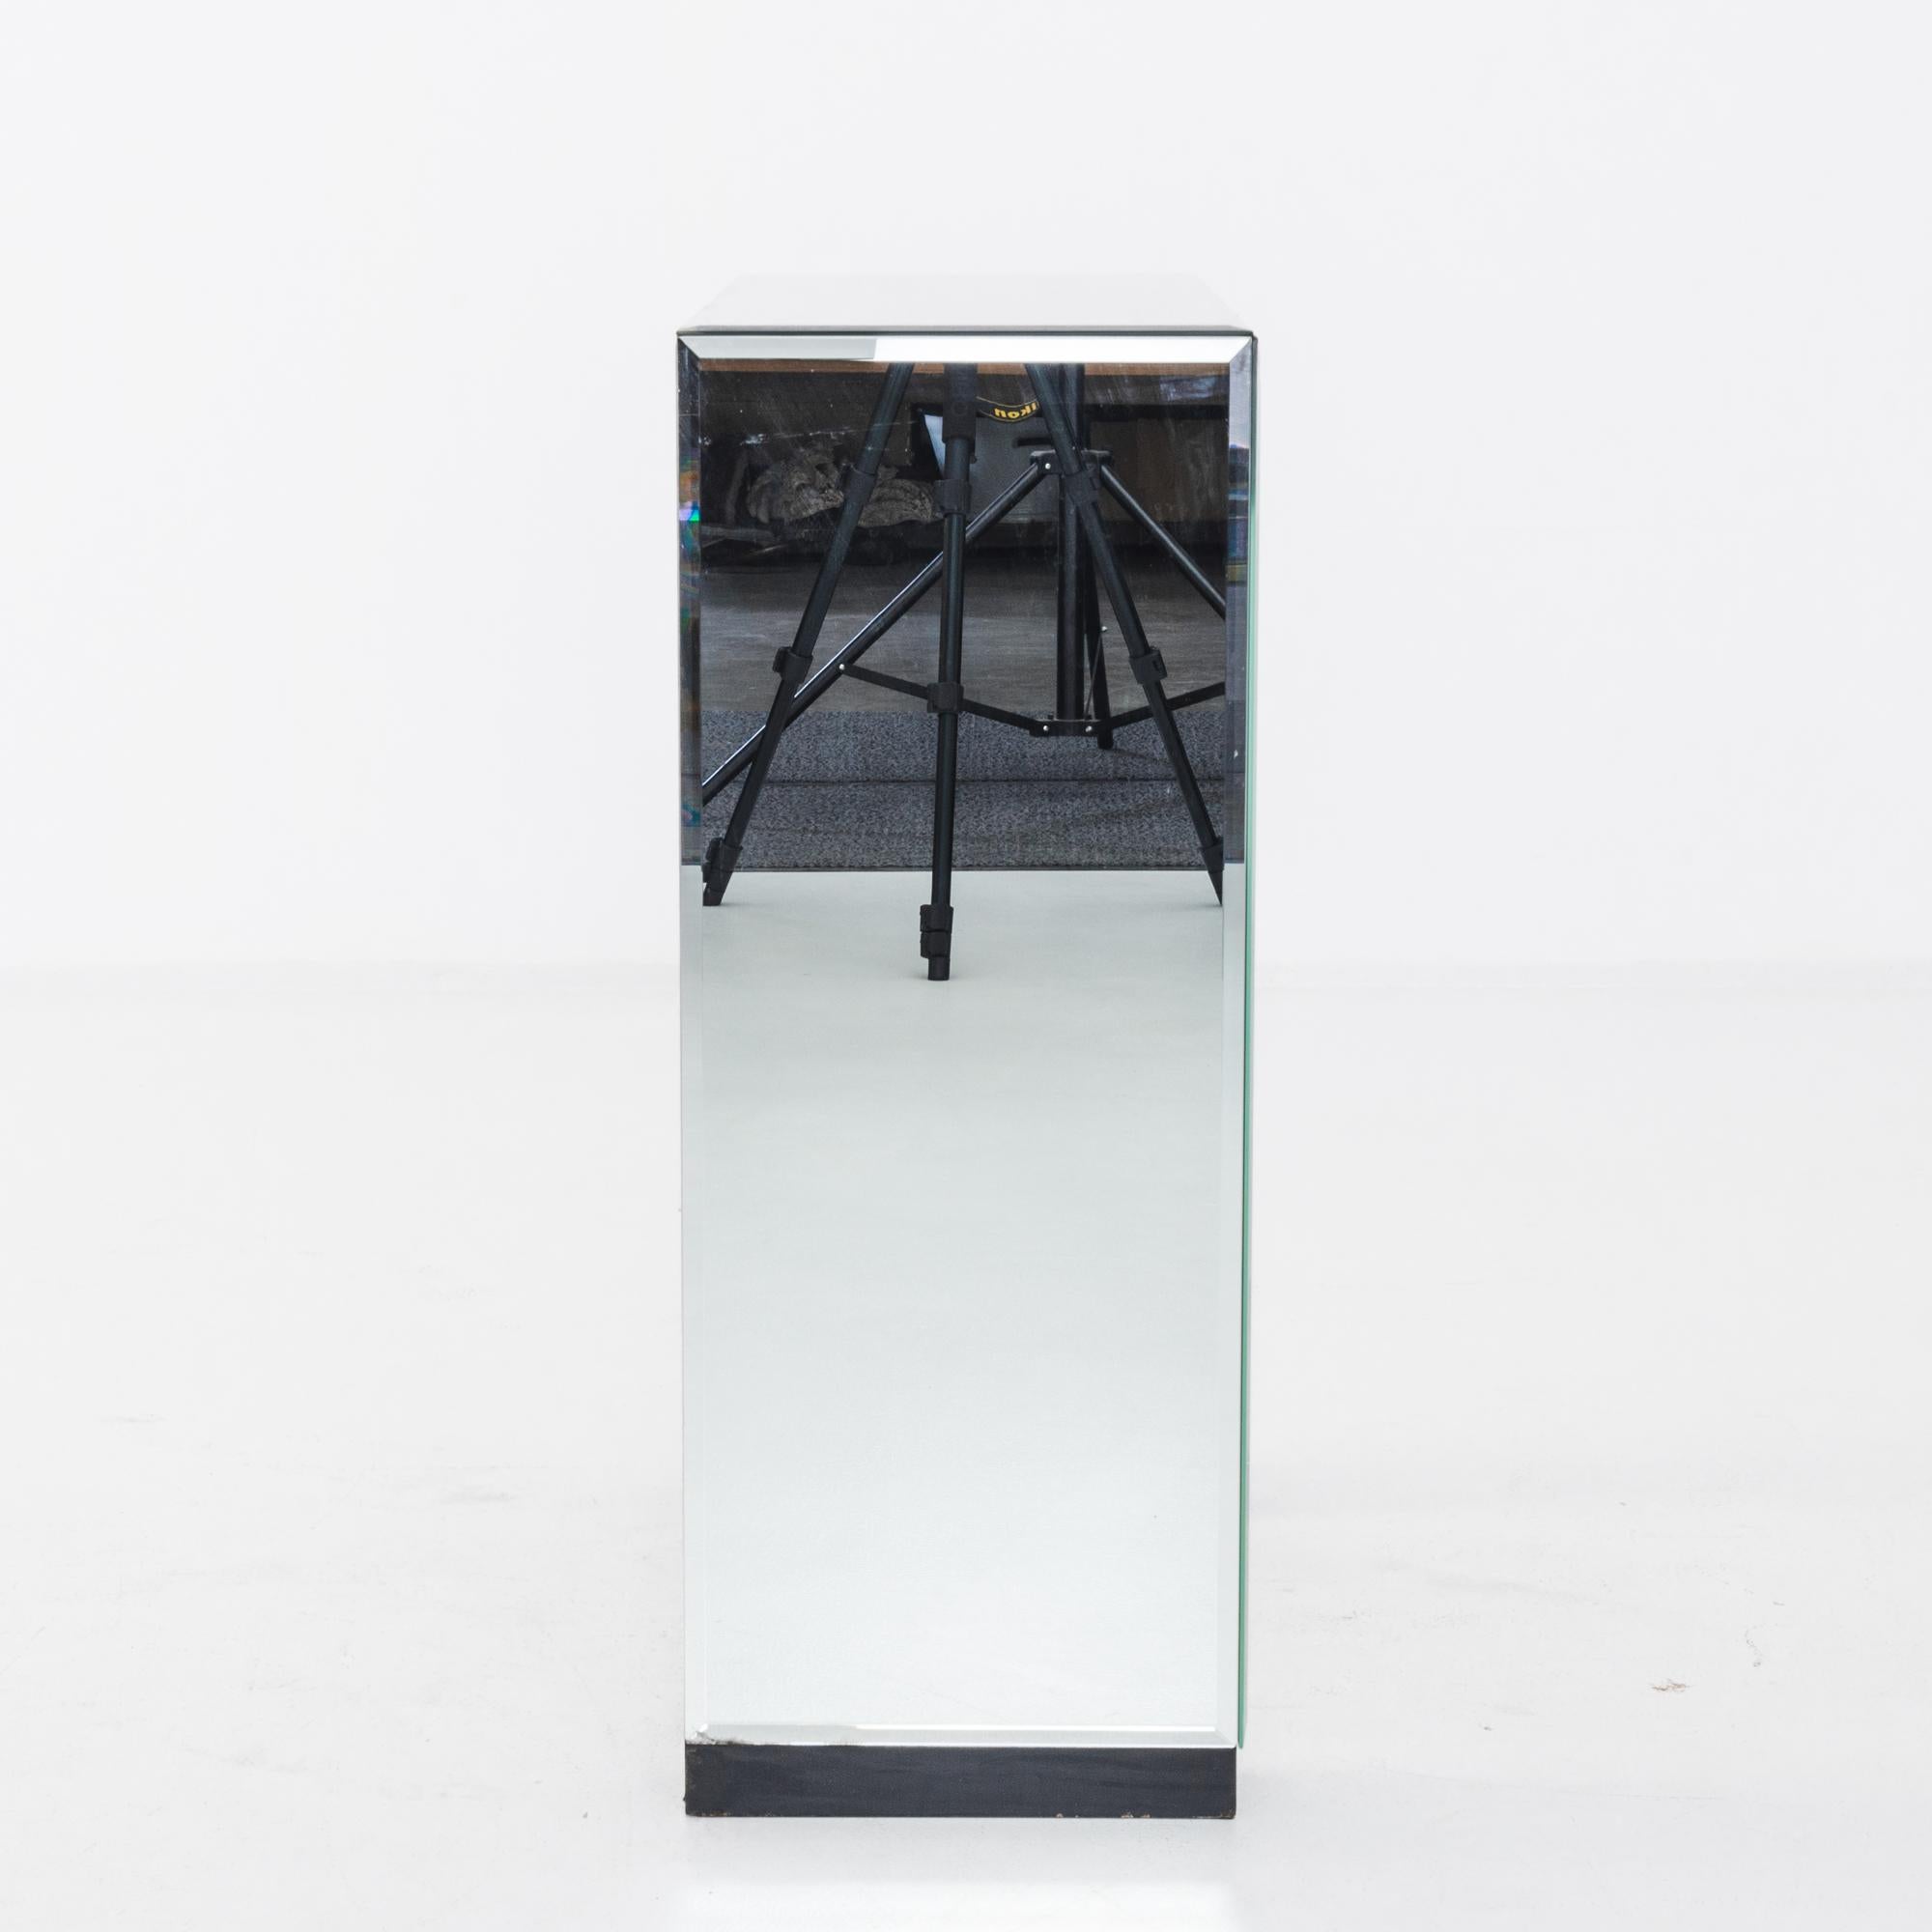 A mirrored glass console table produced in Italy circa 1970. Like a massive cut gem winking in the sunlight, this distinctive console table catches the eye immediately. From its unique silhouette–two supports standing like twin trunks around a tall,